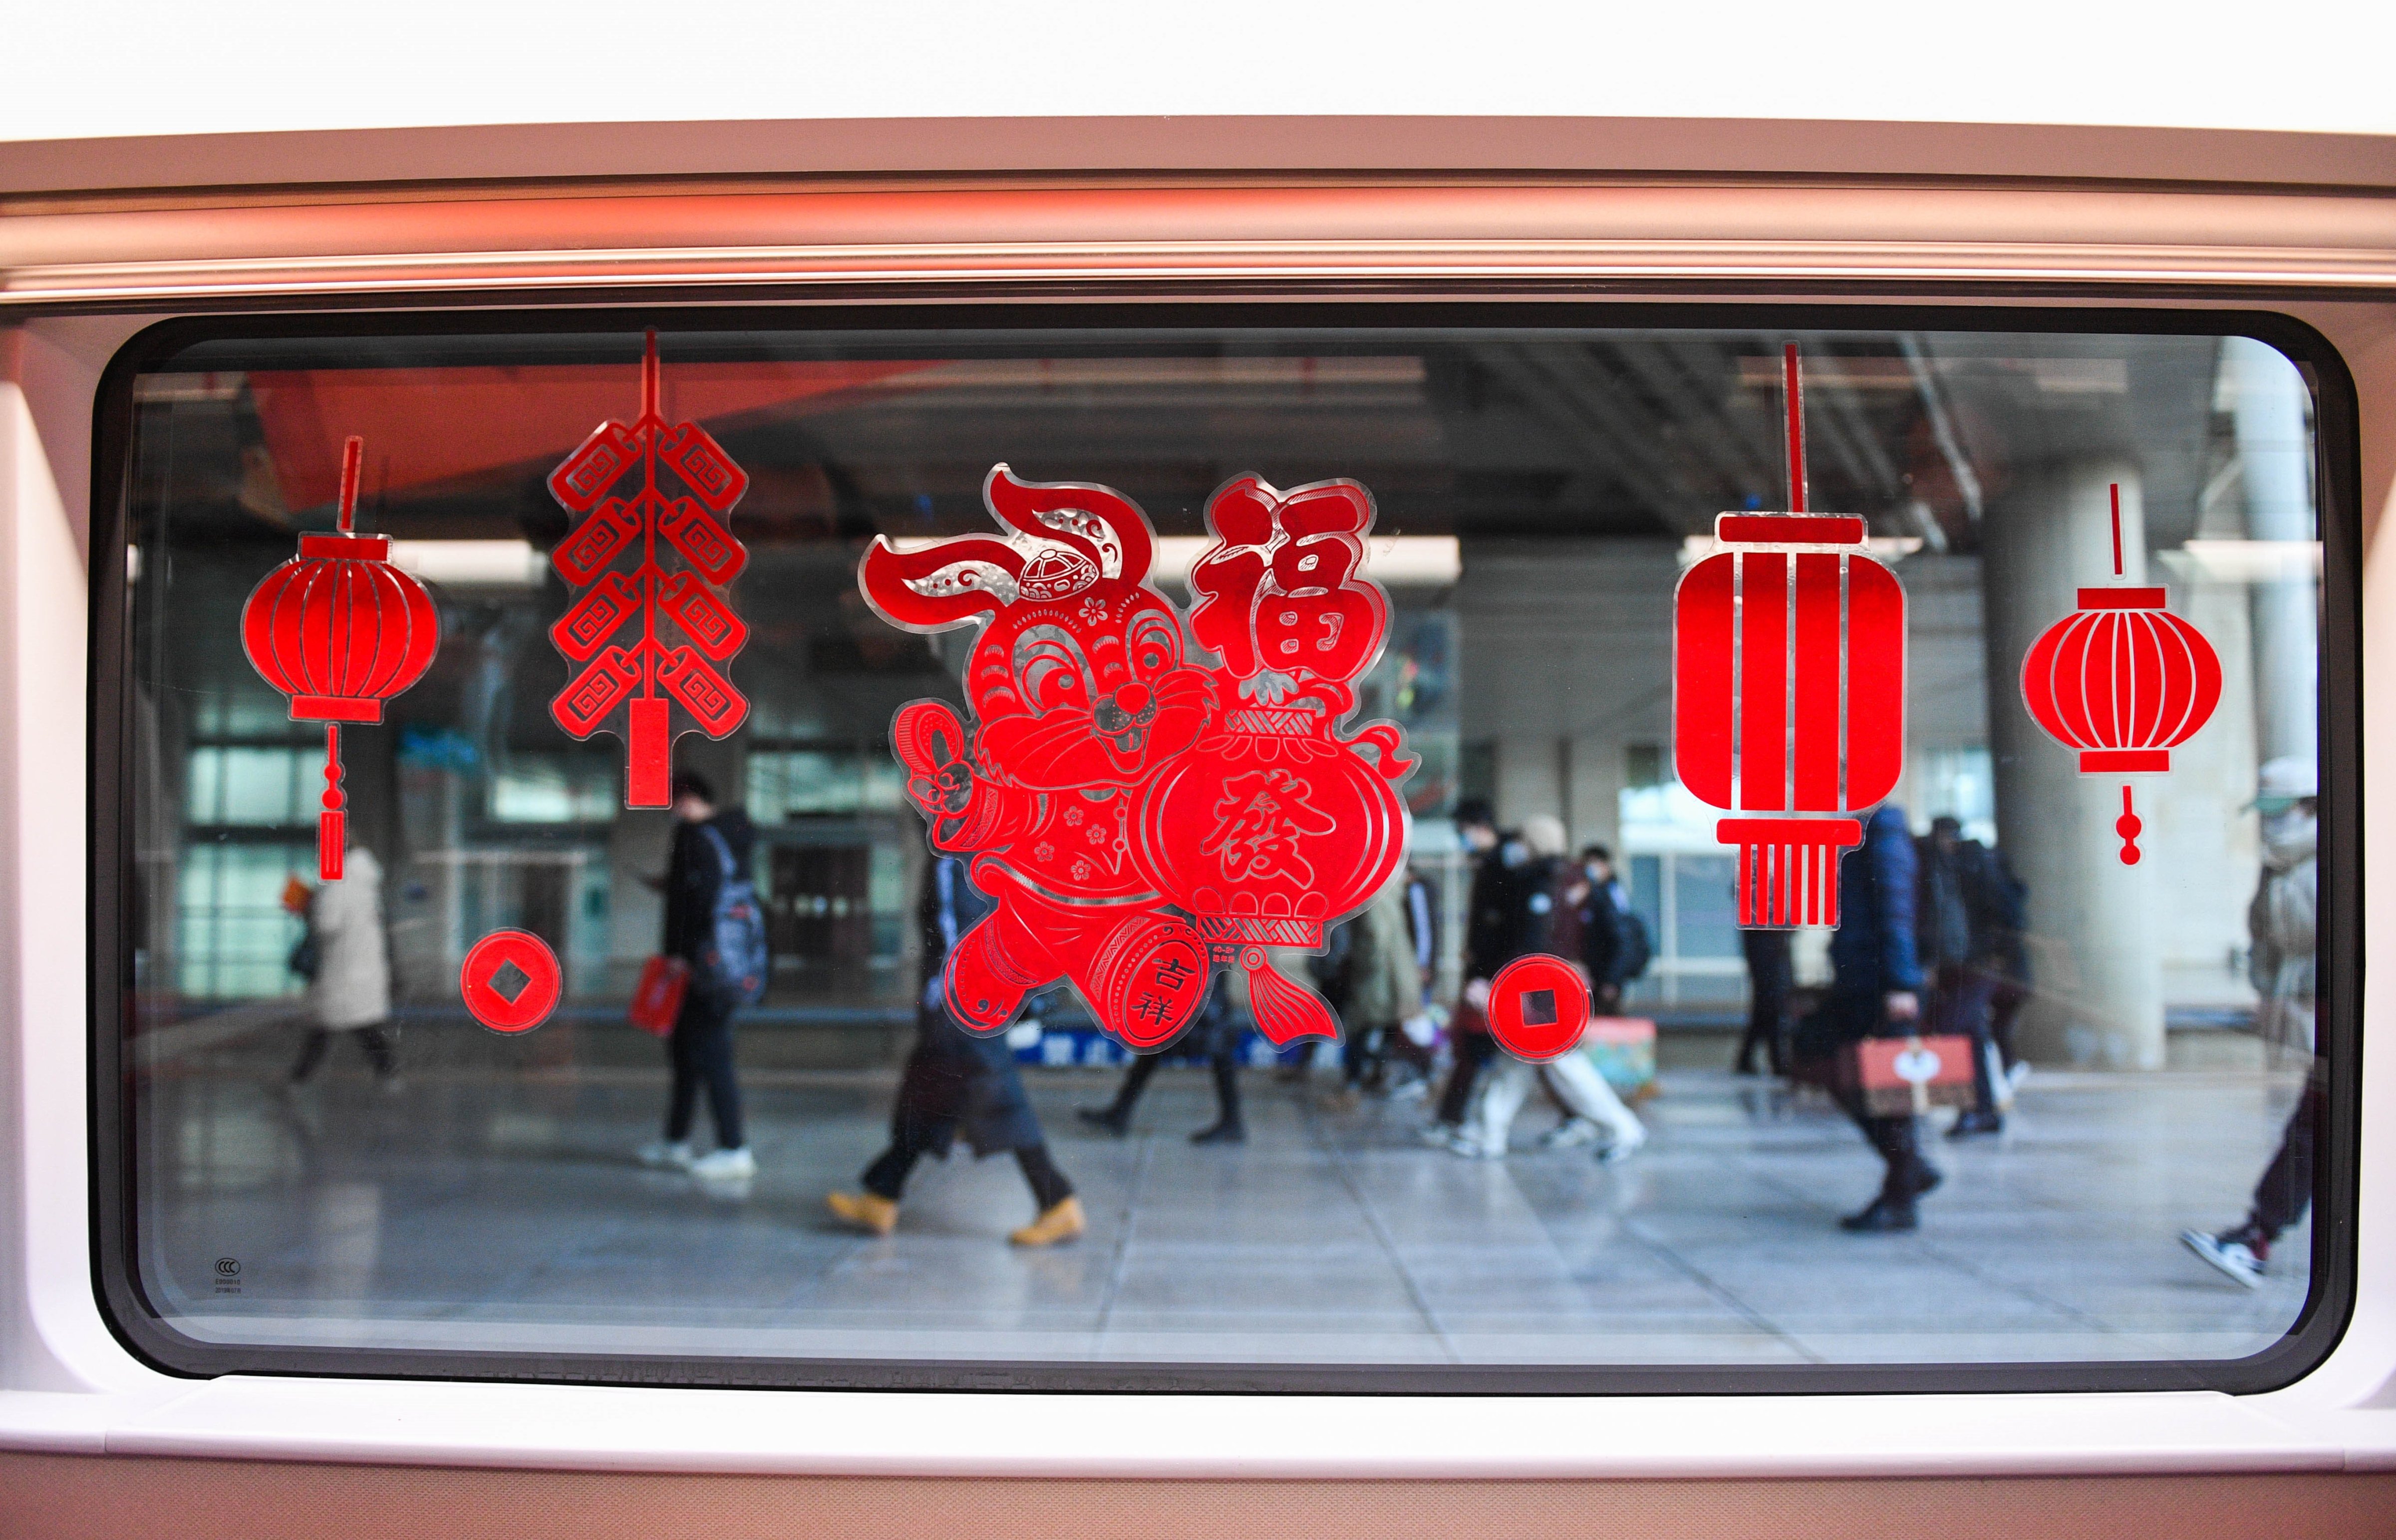 Decorations adorn the Fuxing bullet train G2457, which travels from Beijing to Hohhot, at Hohhot East Railway Station in Hohhot, Jan. 14, 2023. (Liu Lei—Xinhua/Getty Images)